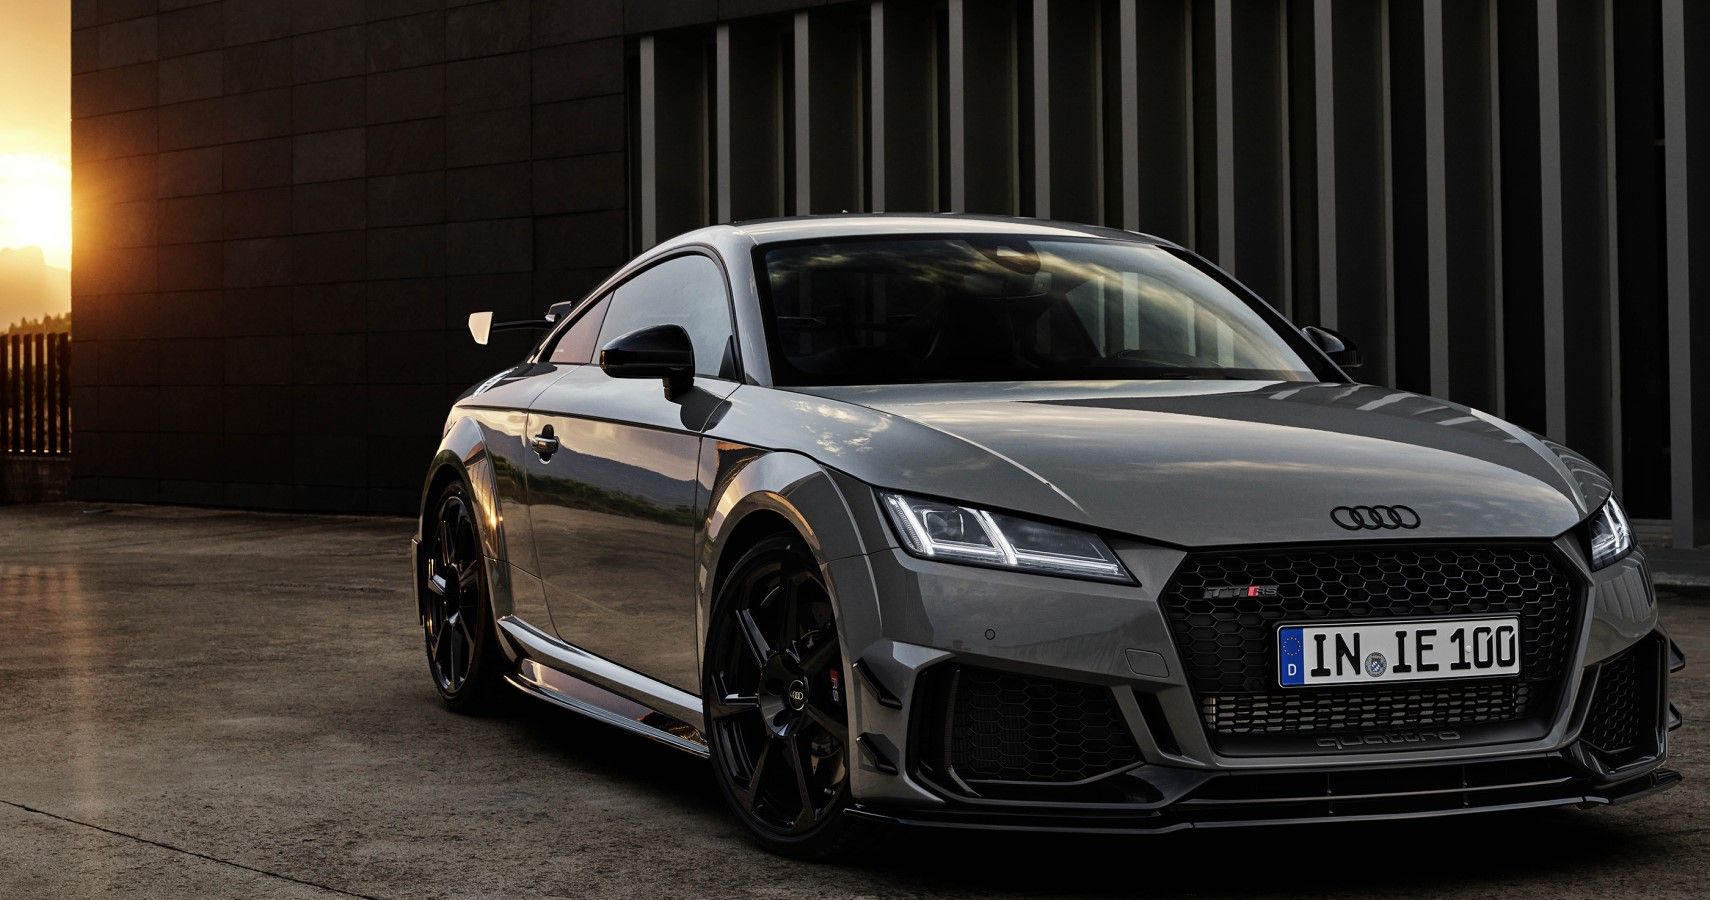 Audi TT RS Coupe Iconic Edition front third quarter hd wallpaper view